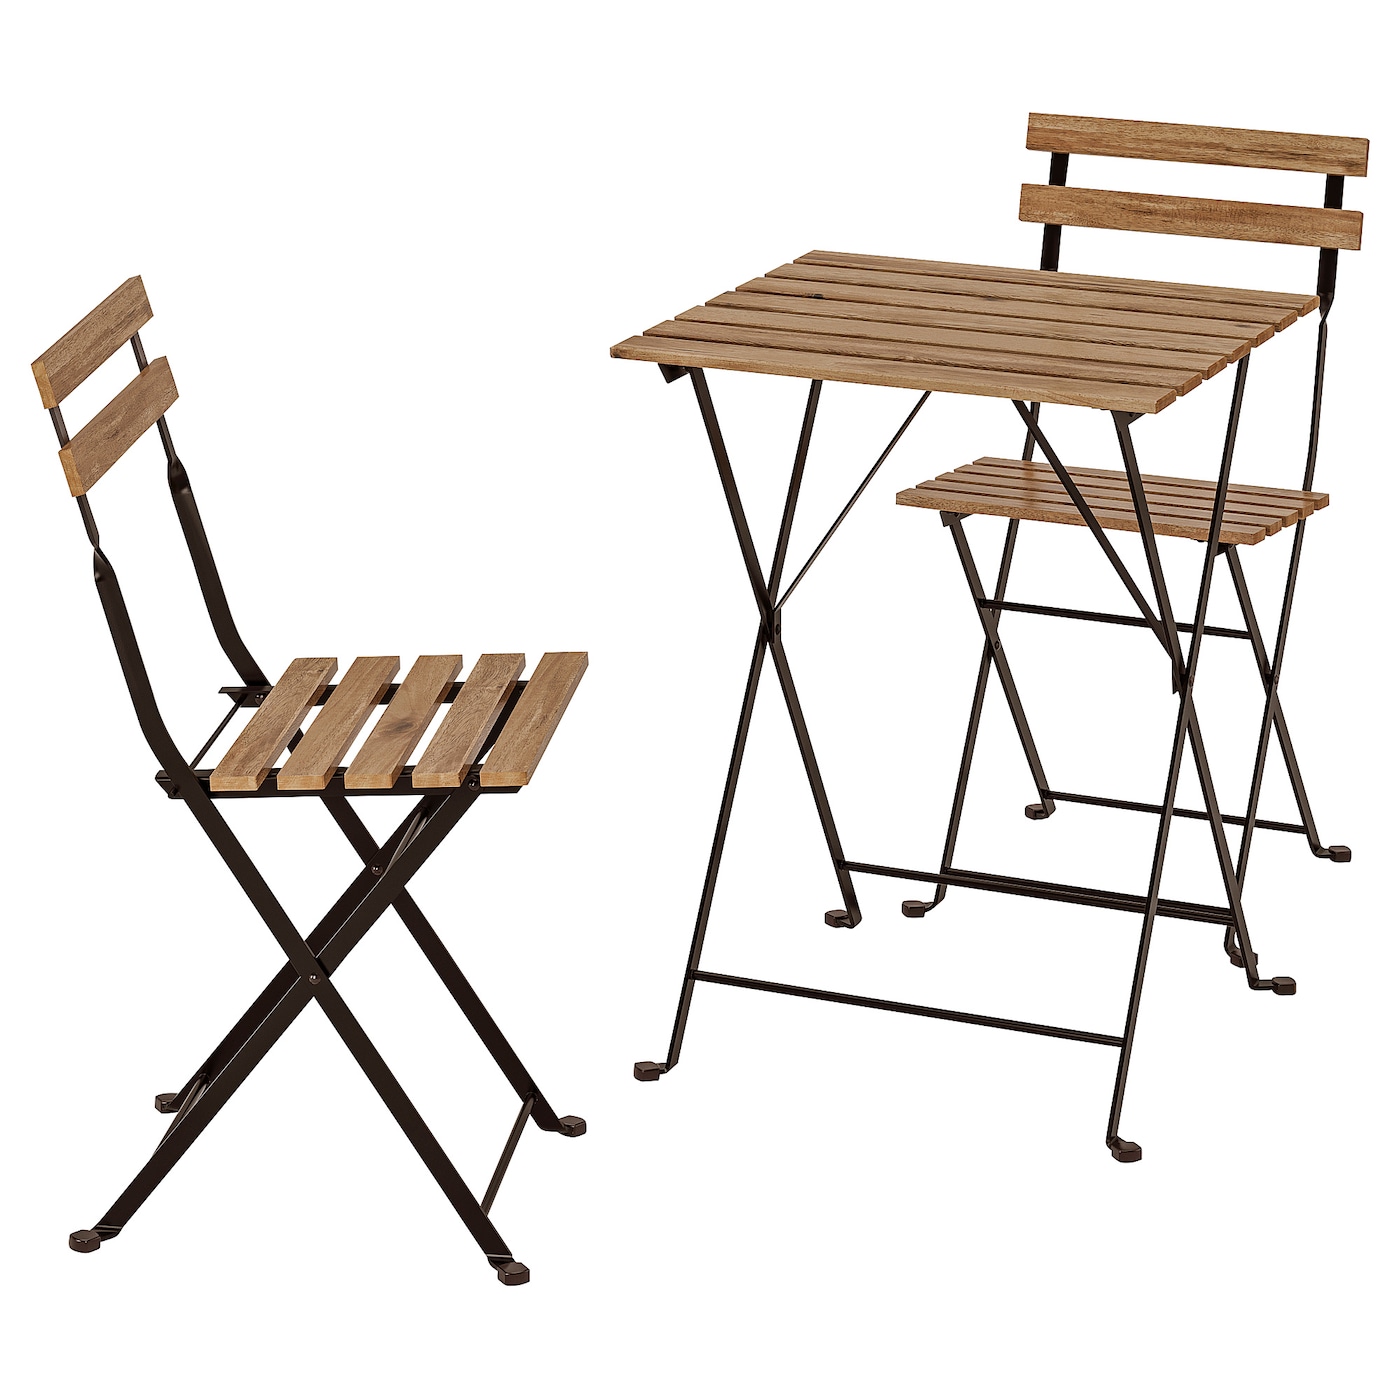 ikea table and chairs outdoor